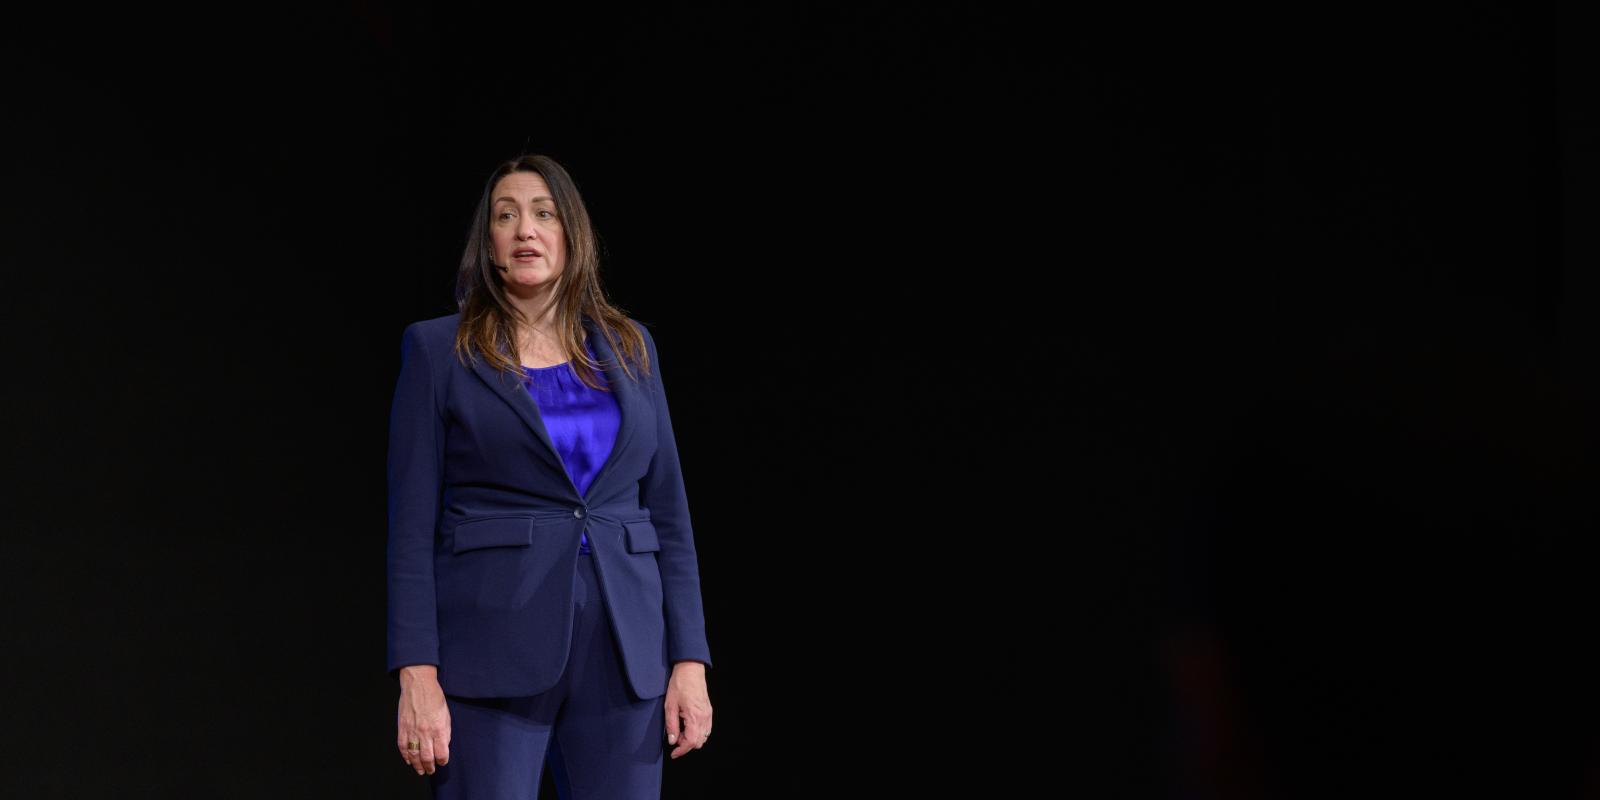 A woman presents in front of a dark background wearing a suit